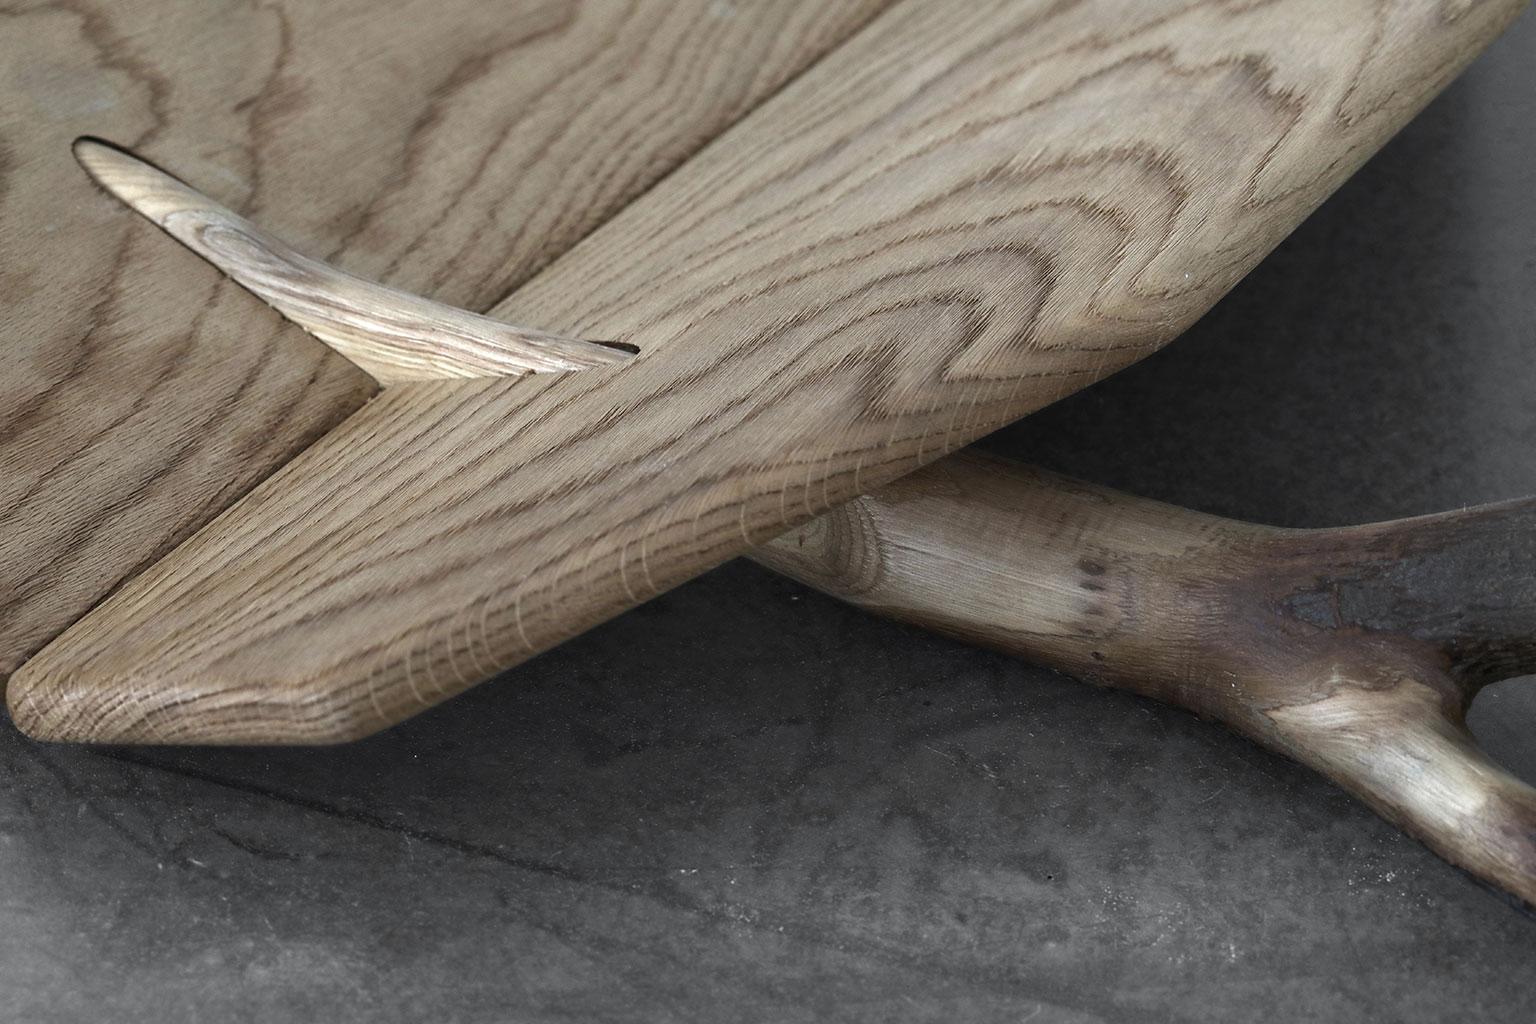 The doveTail centerpiece is a miniature evocation of the iconic fallen tree bench where brute force is replaced by the fragility that is as much a part of the tree.

Though in a numbered edition, each doveTail is unique on its own thanks to the